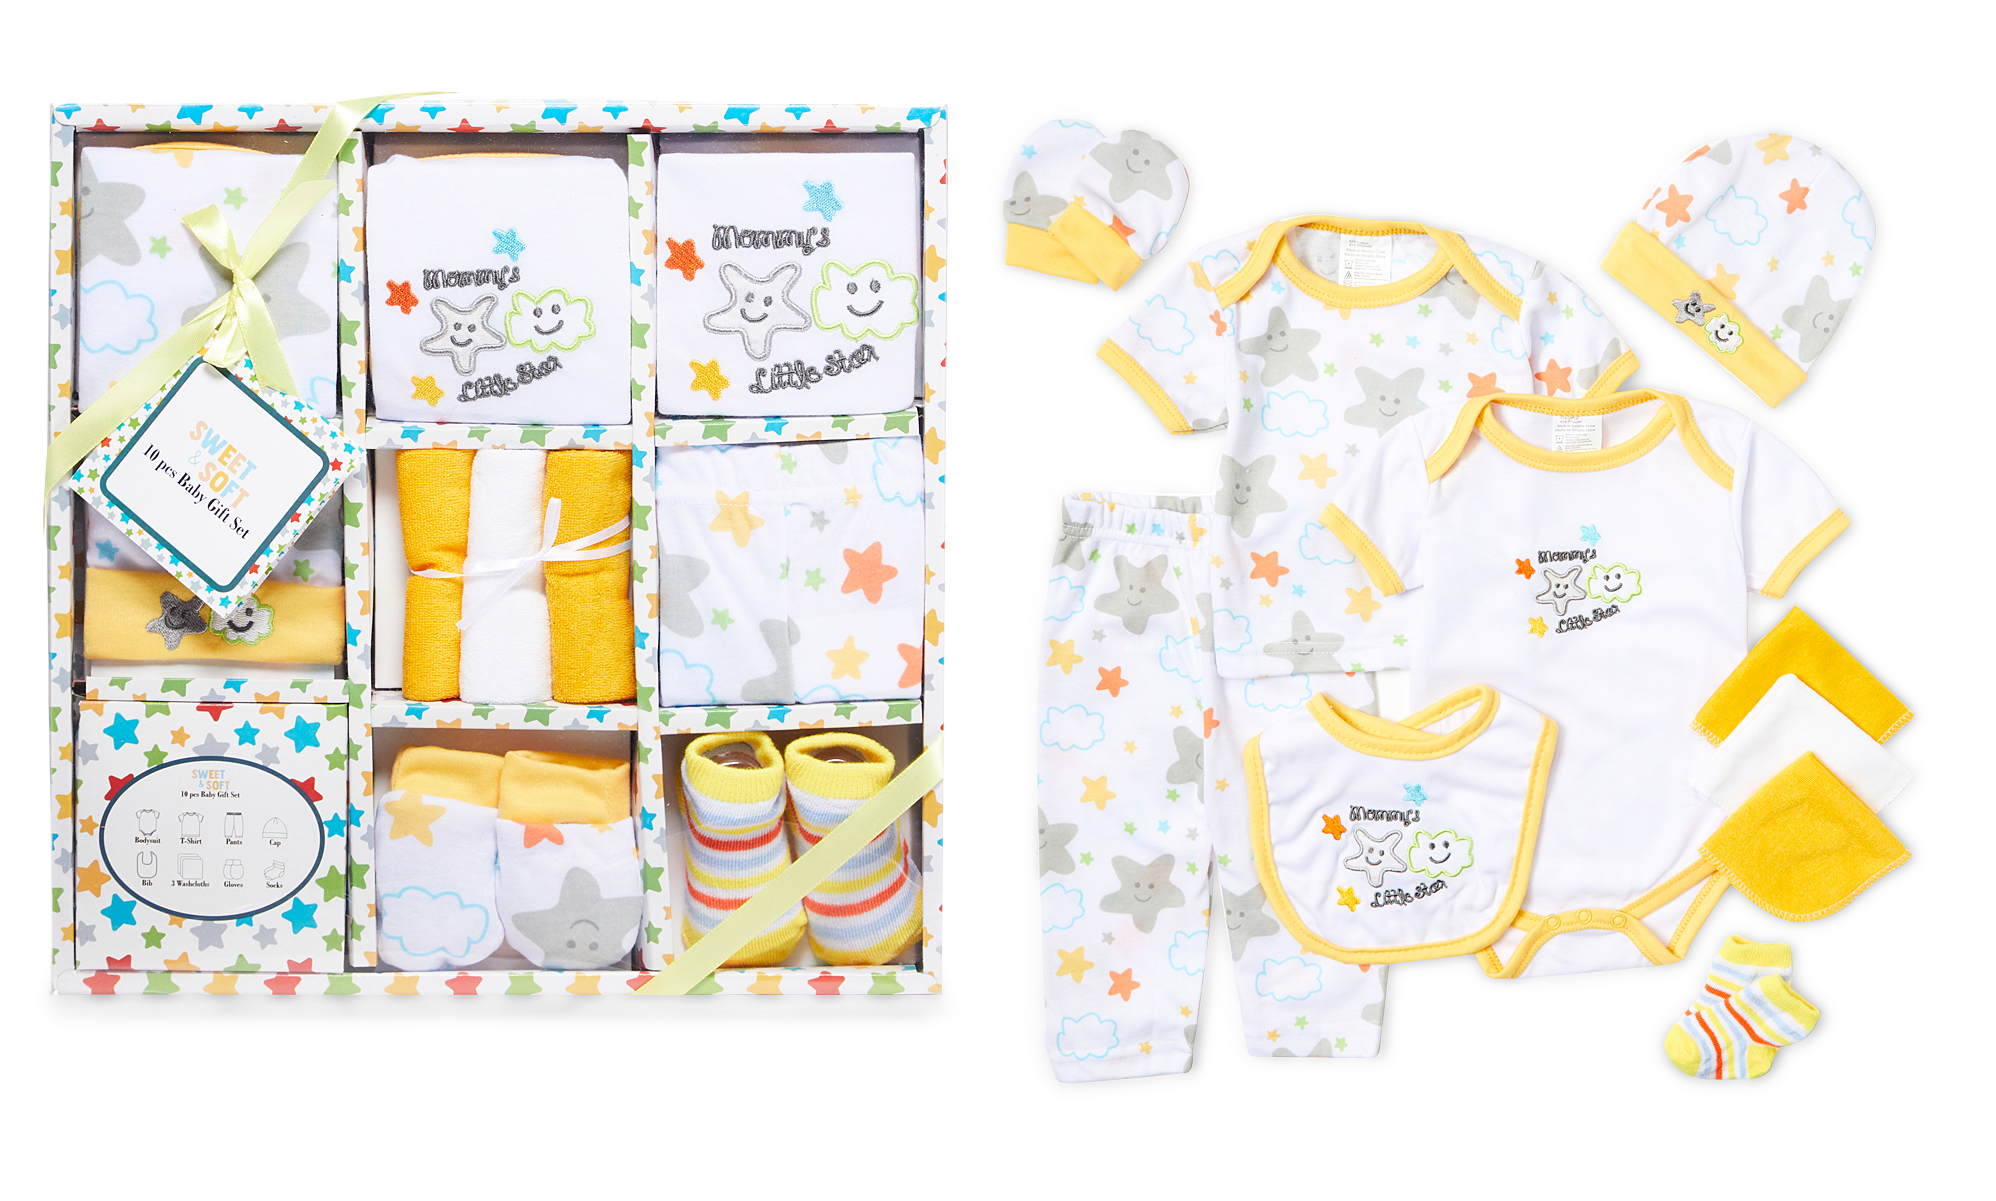 10 PC. Infant Girl's Gift Sets w/ Embroidered Star & Cloud Print